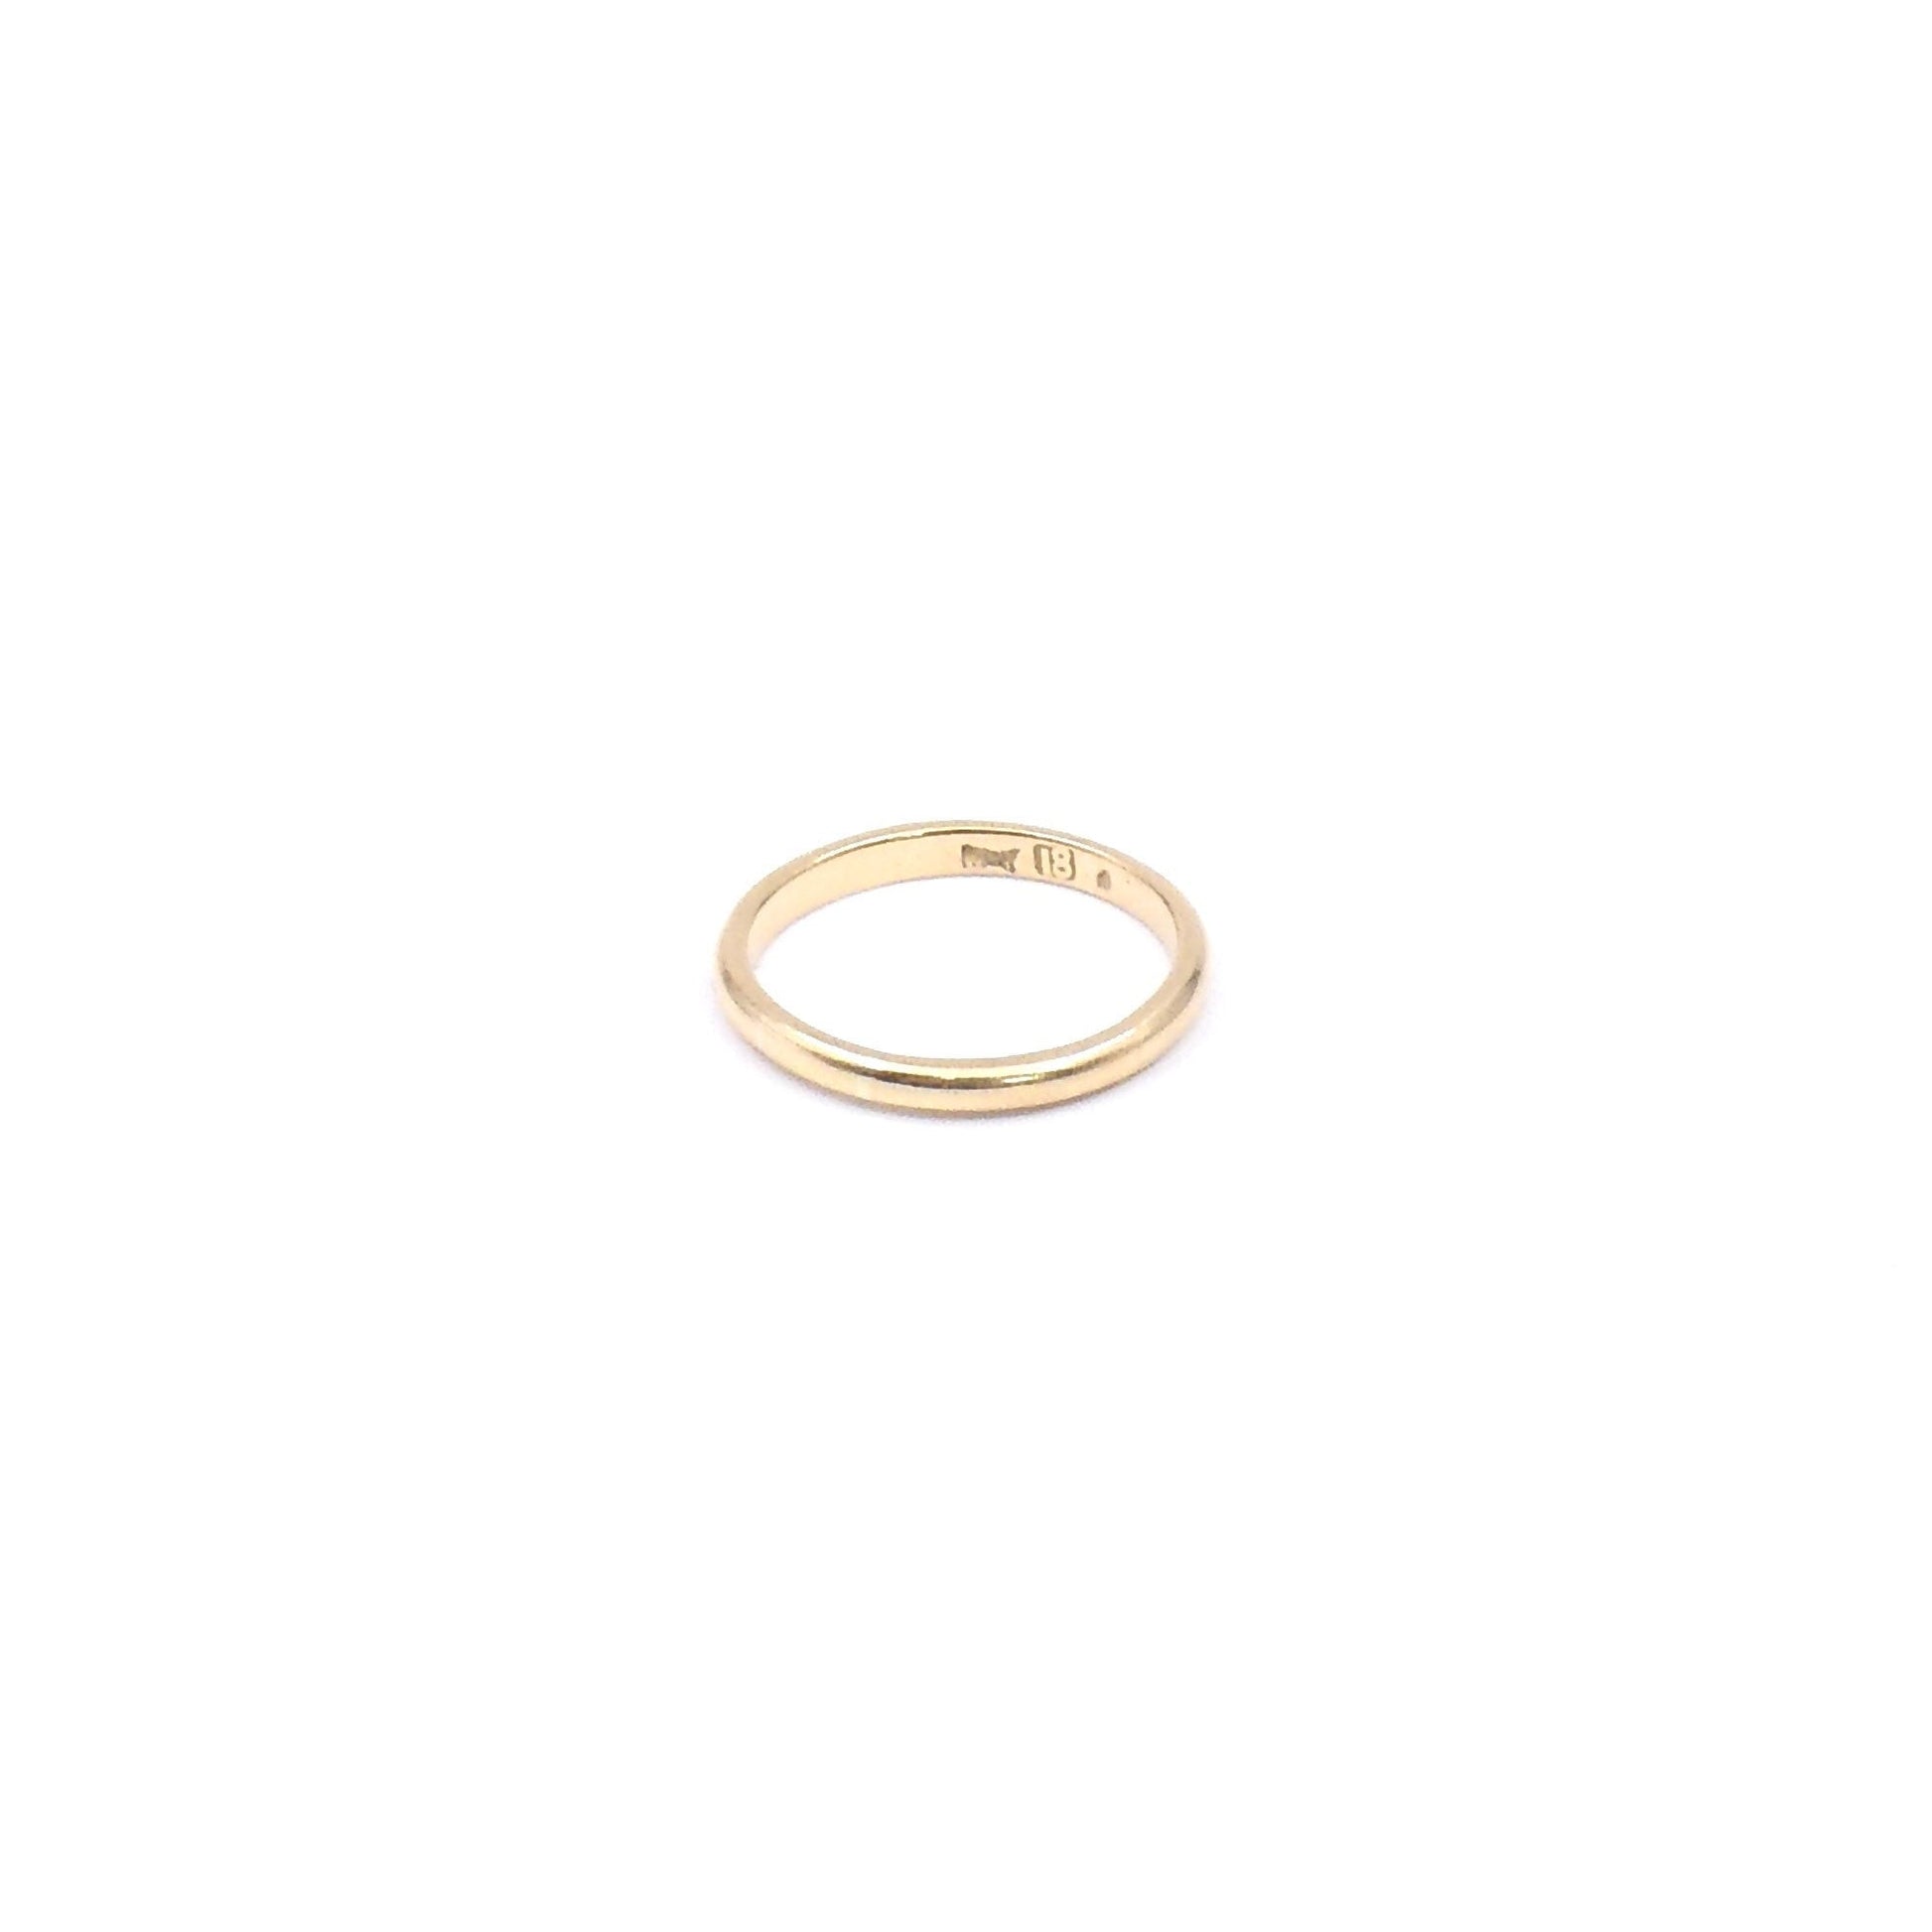 Vintage band, 18kt yellow gold wedding ring or vintage ring. - Collected